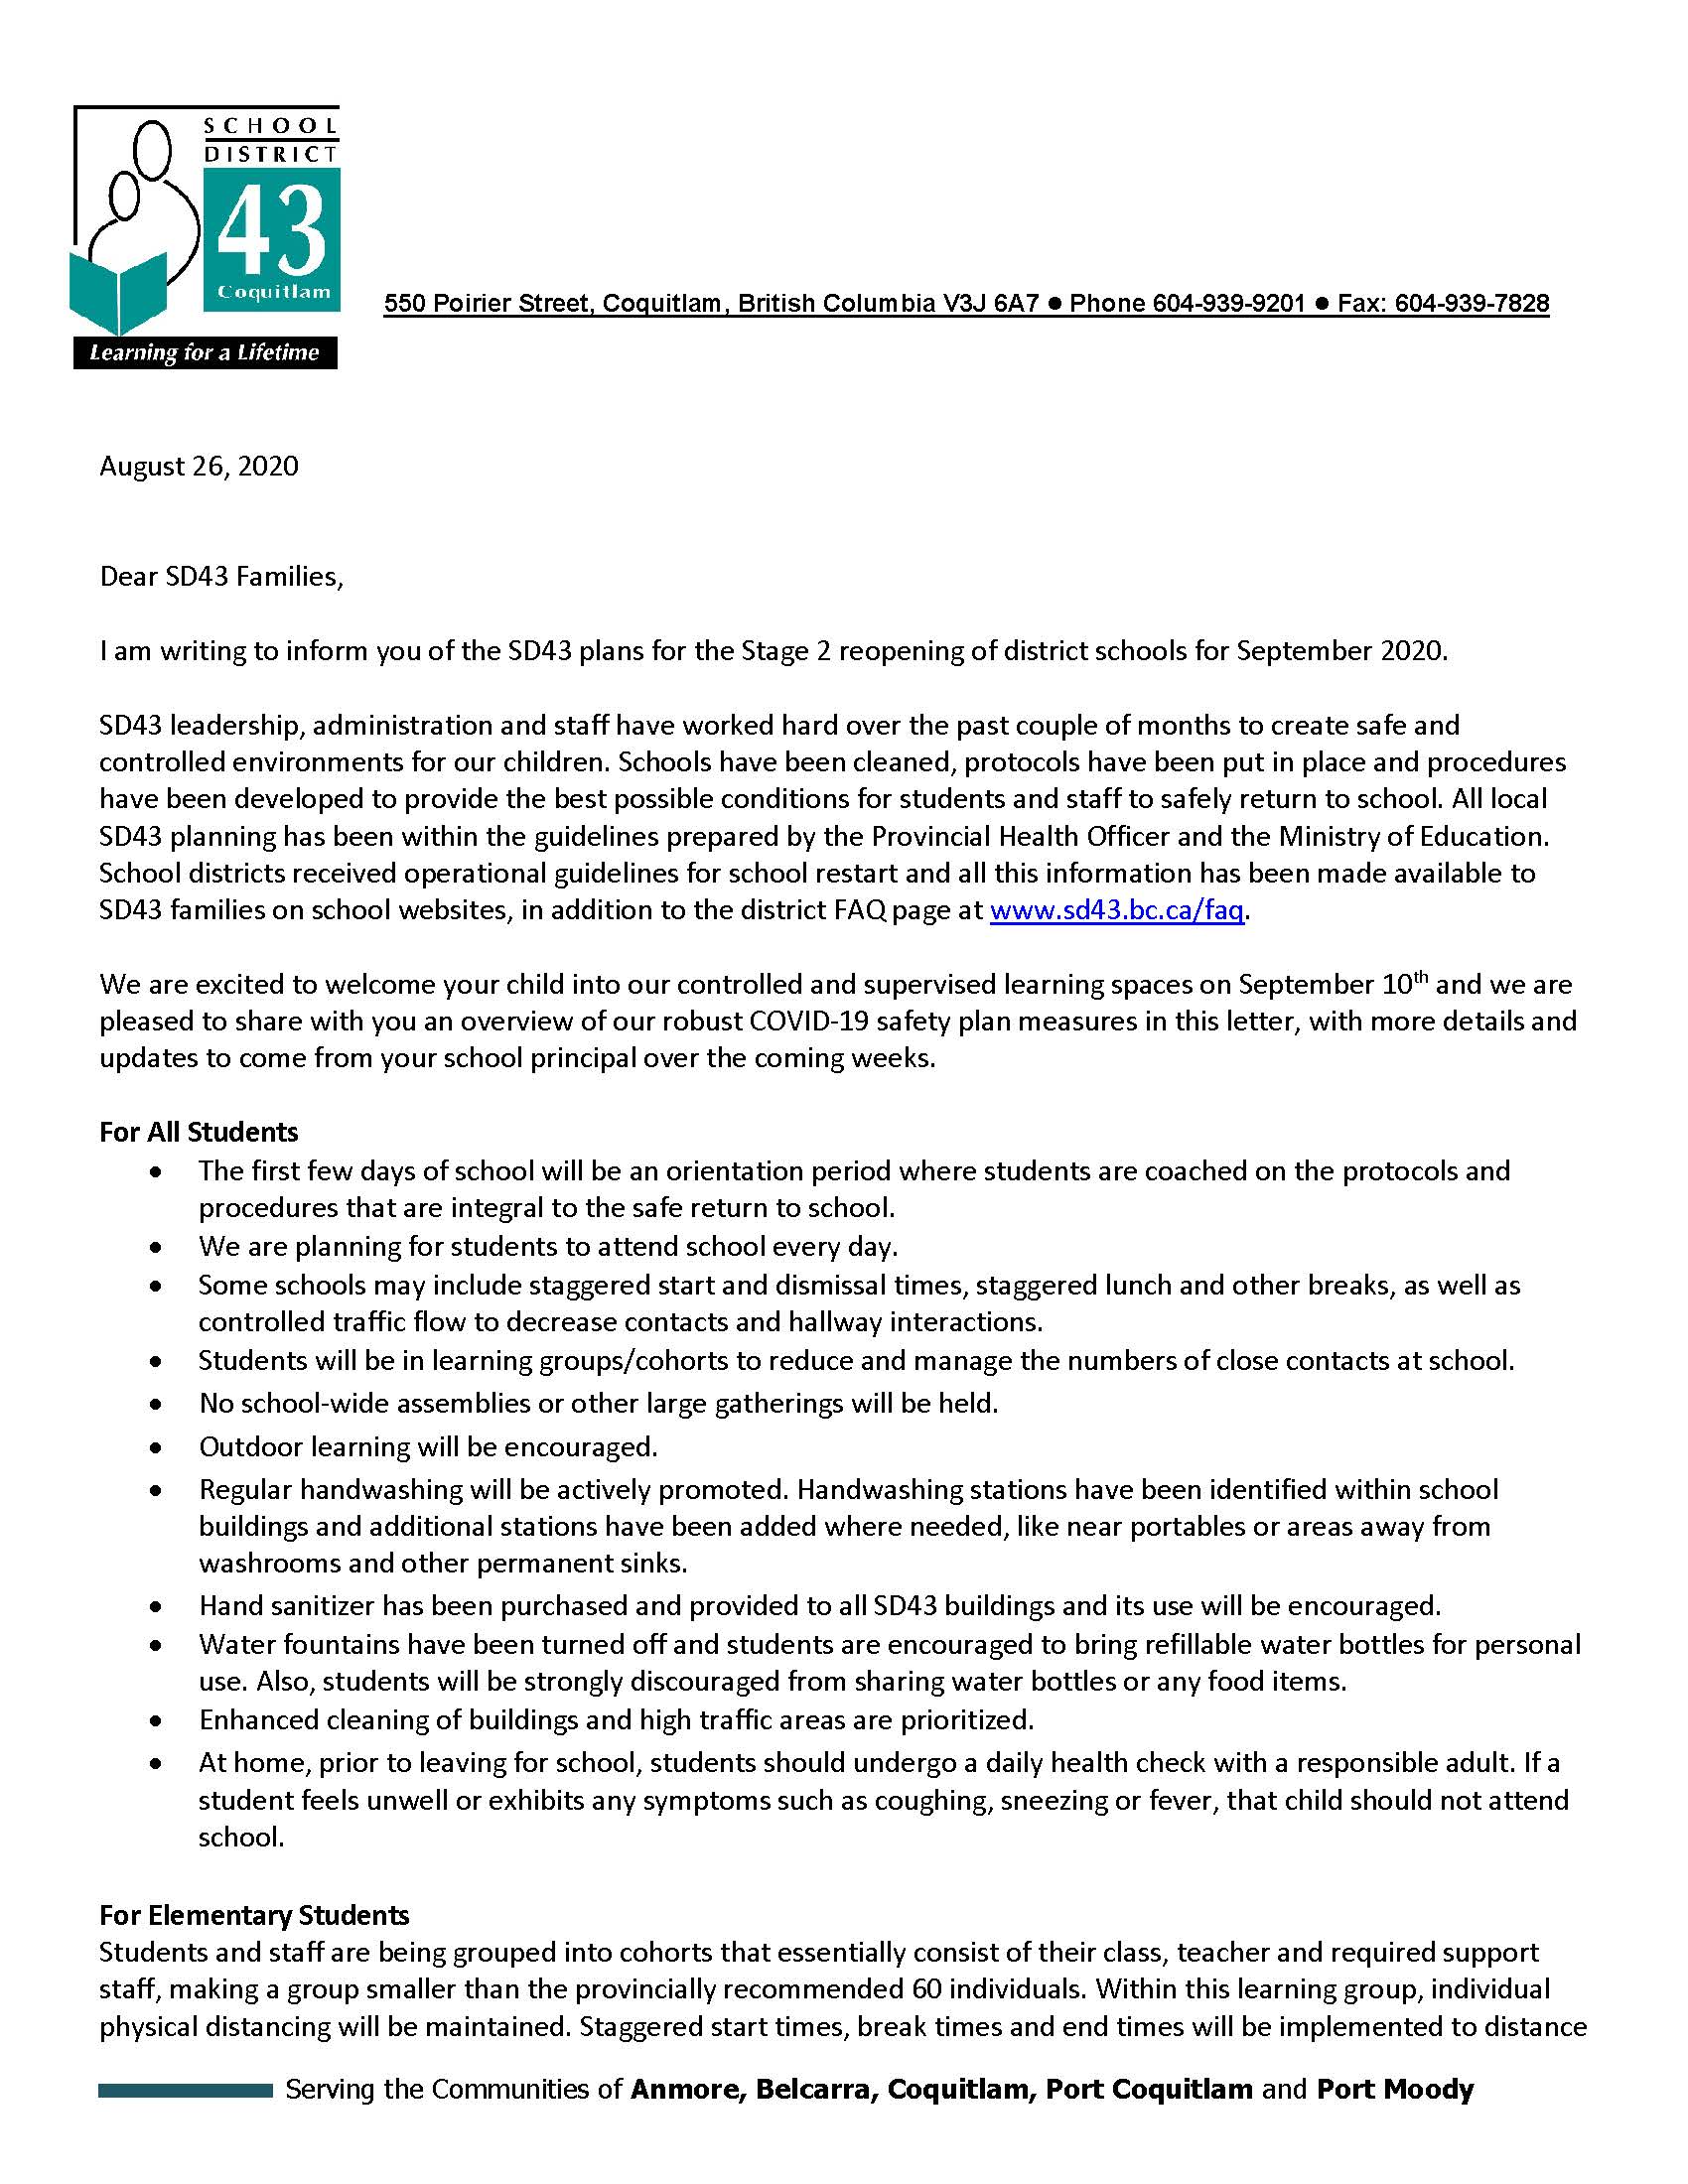 Superintendent Letter to Parents-Guardians re SD43 September 2020 08 26 2020_Page_1.jpg